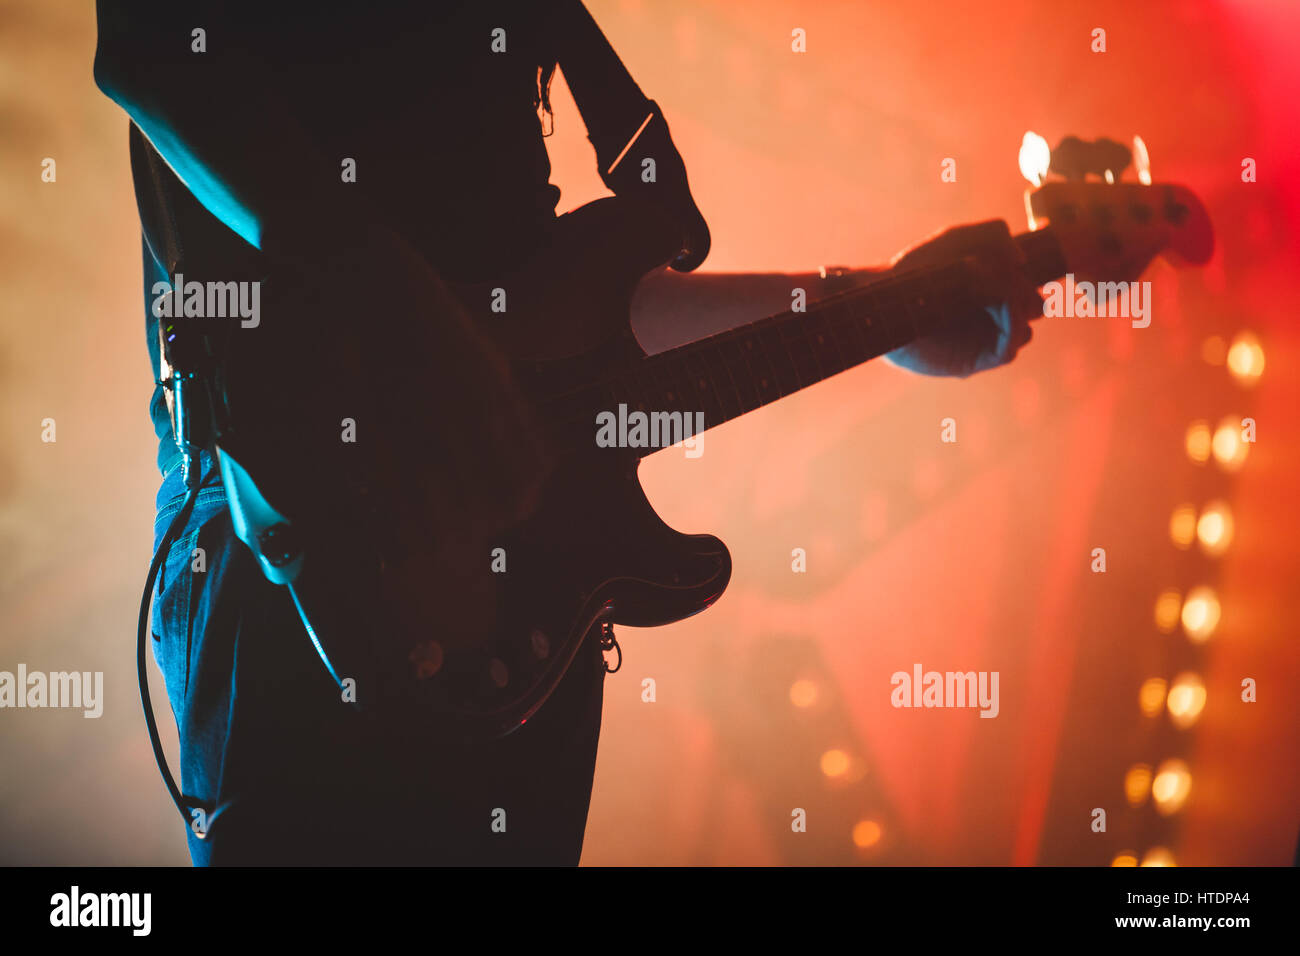 Silhouette of bass guitar player with colorful stage illumination, live rock music theme Stock Photo